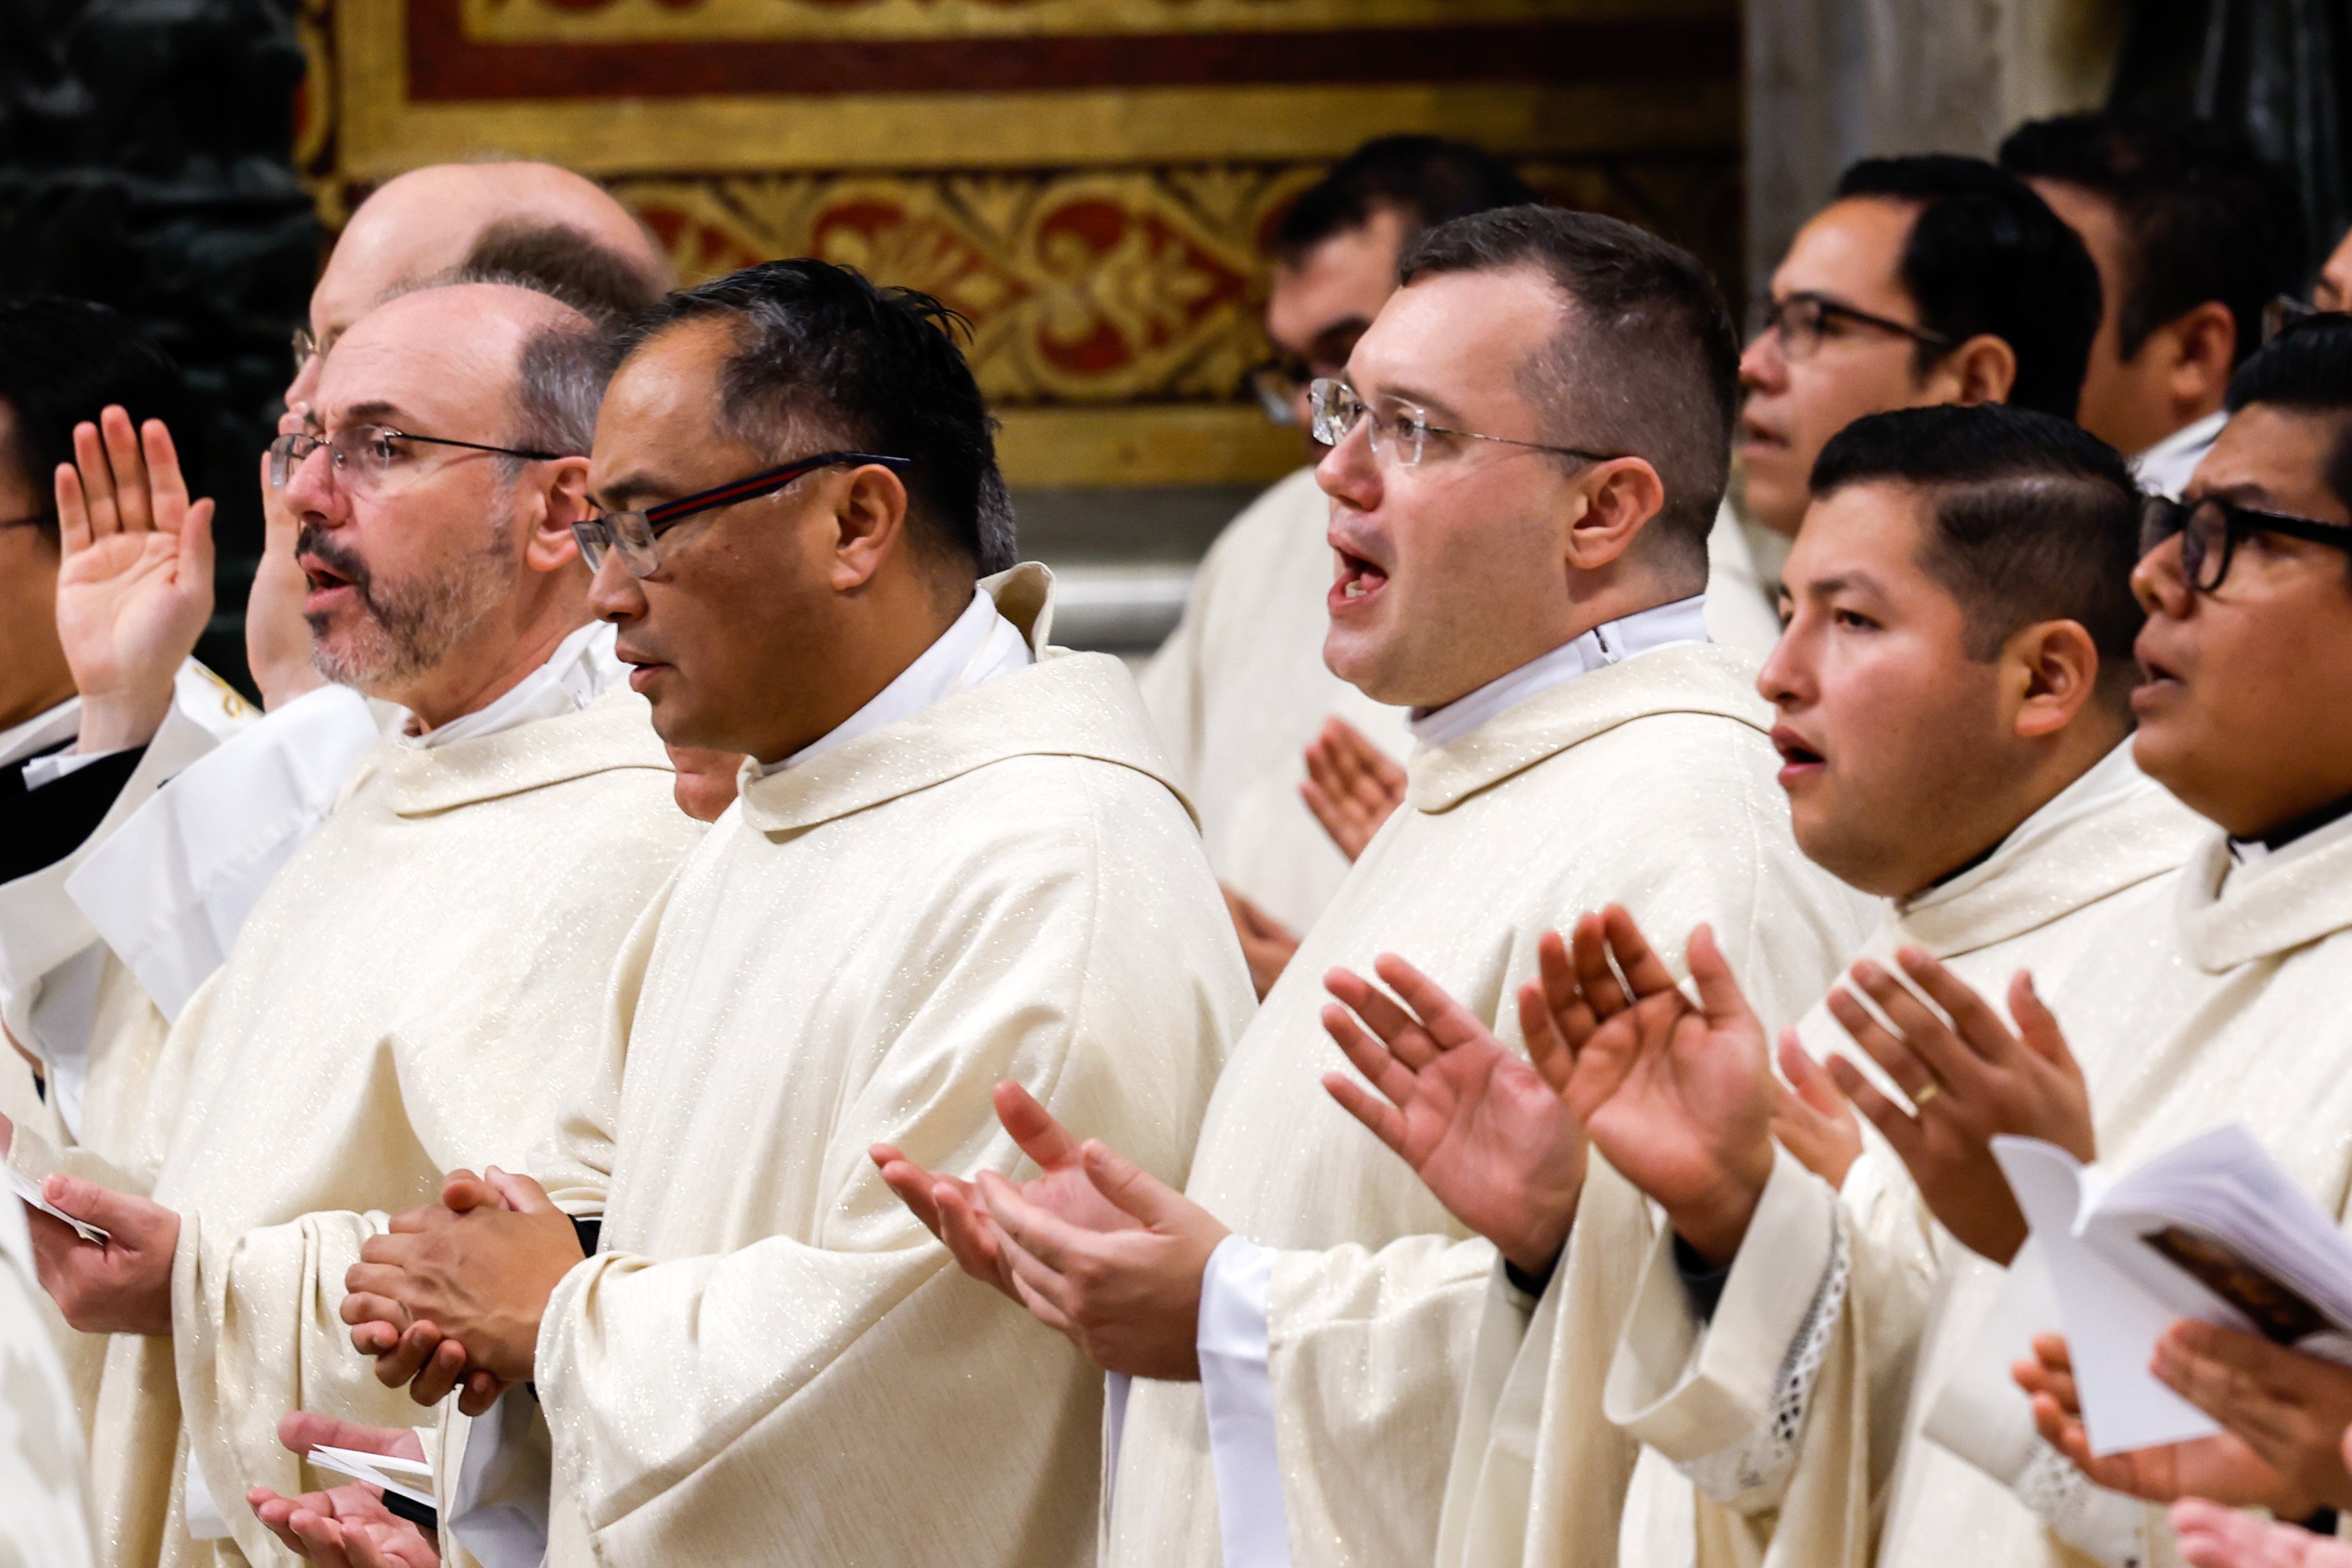 Priests pray during Pope Francis' Mass.